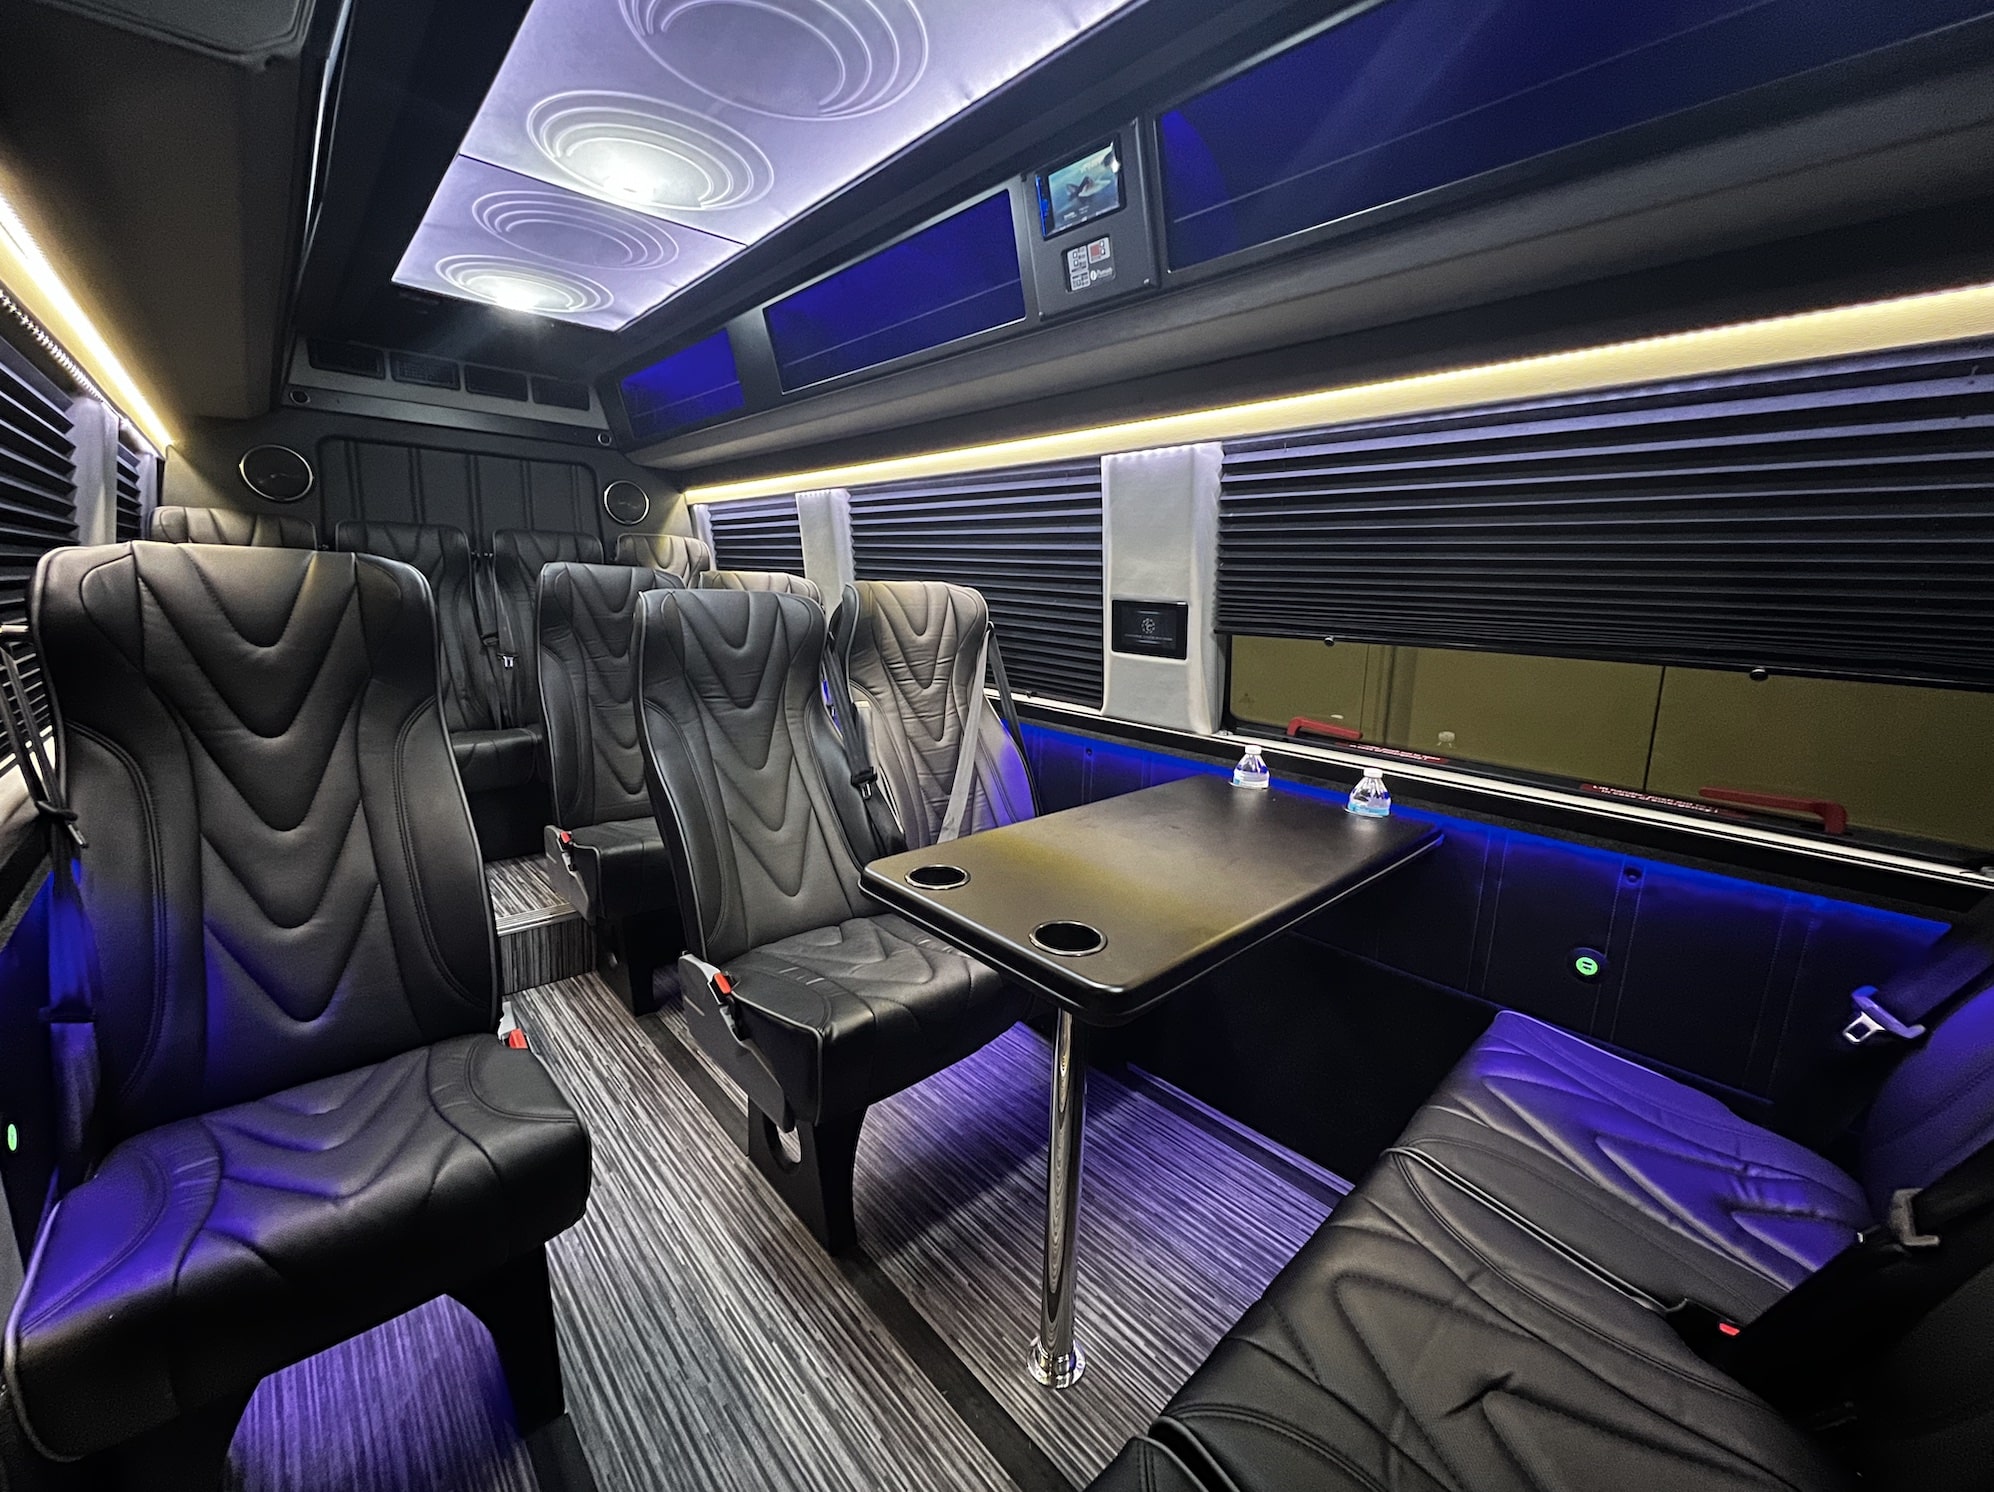 Golden Limo Executive Sprinter Shuttle, interior view with view of conference table seating and large windows